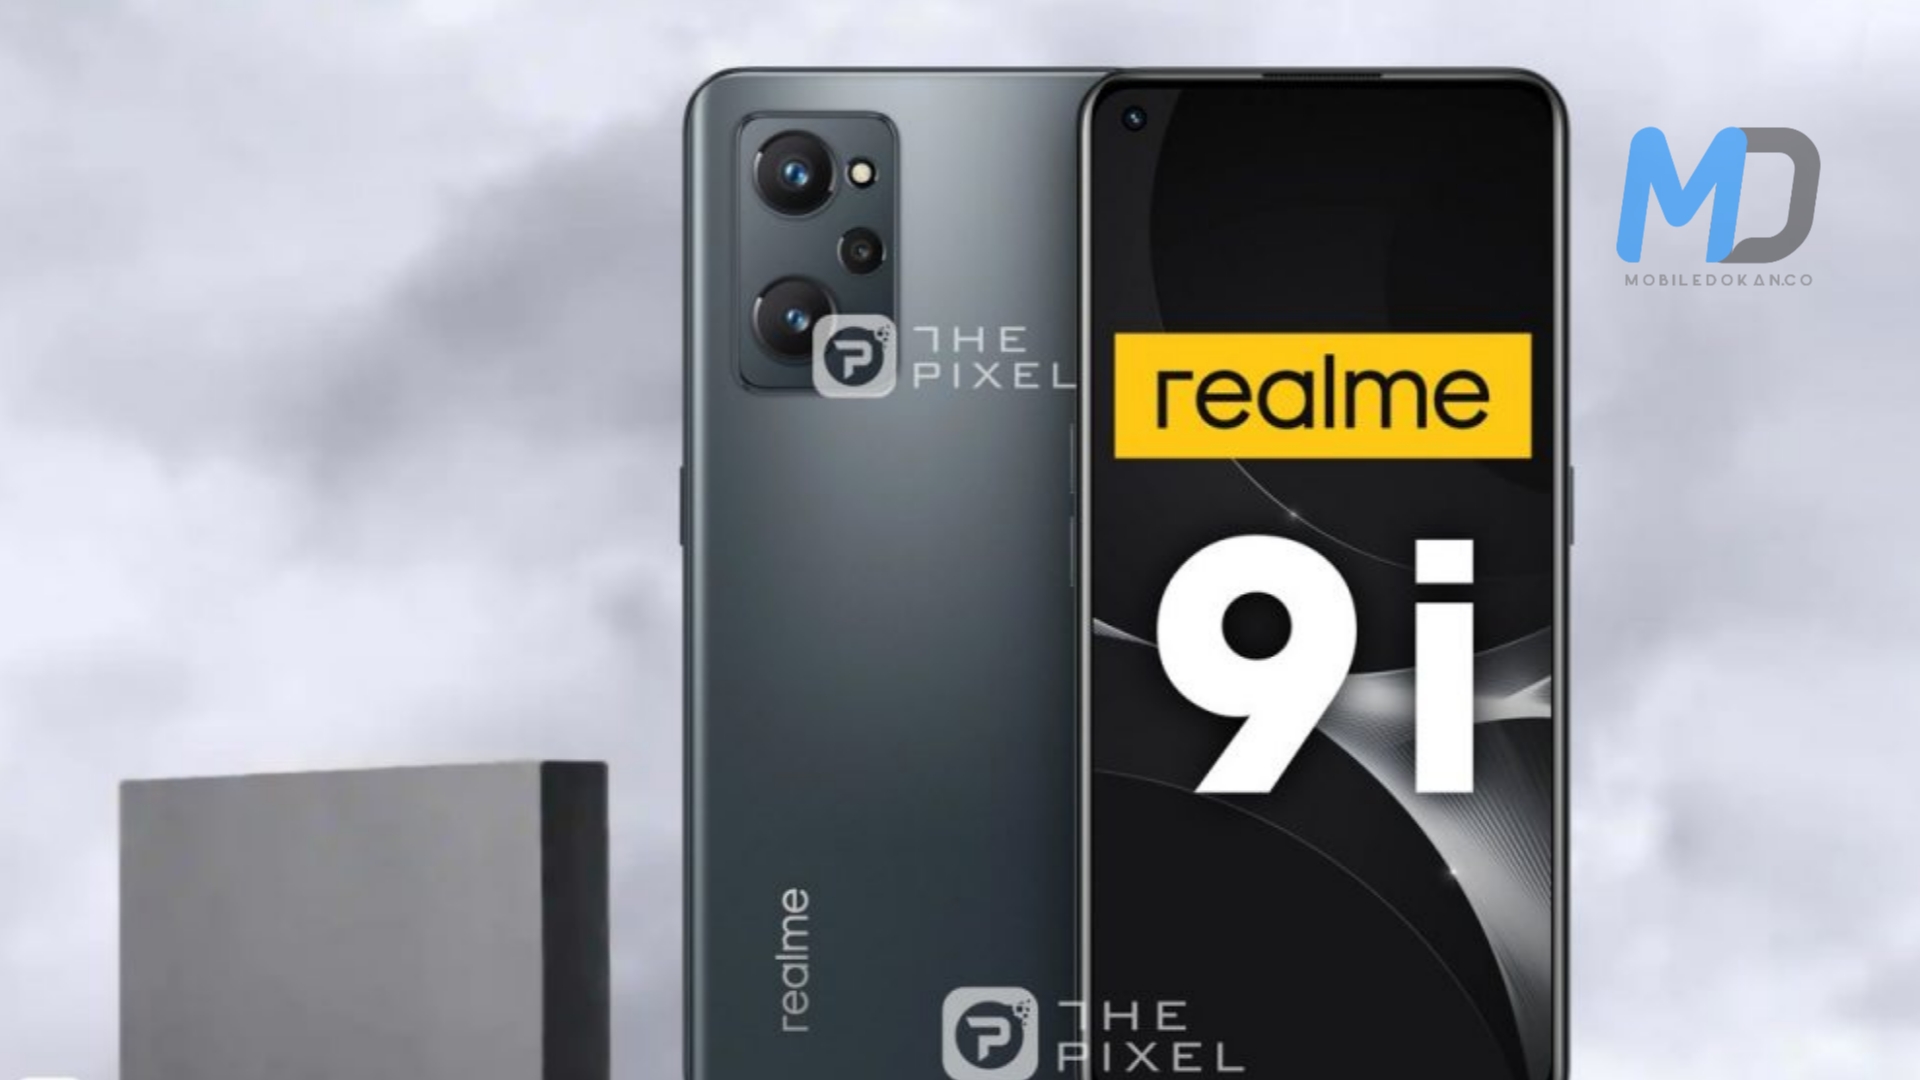 Realme 9i official design leaked through concept renders